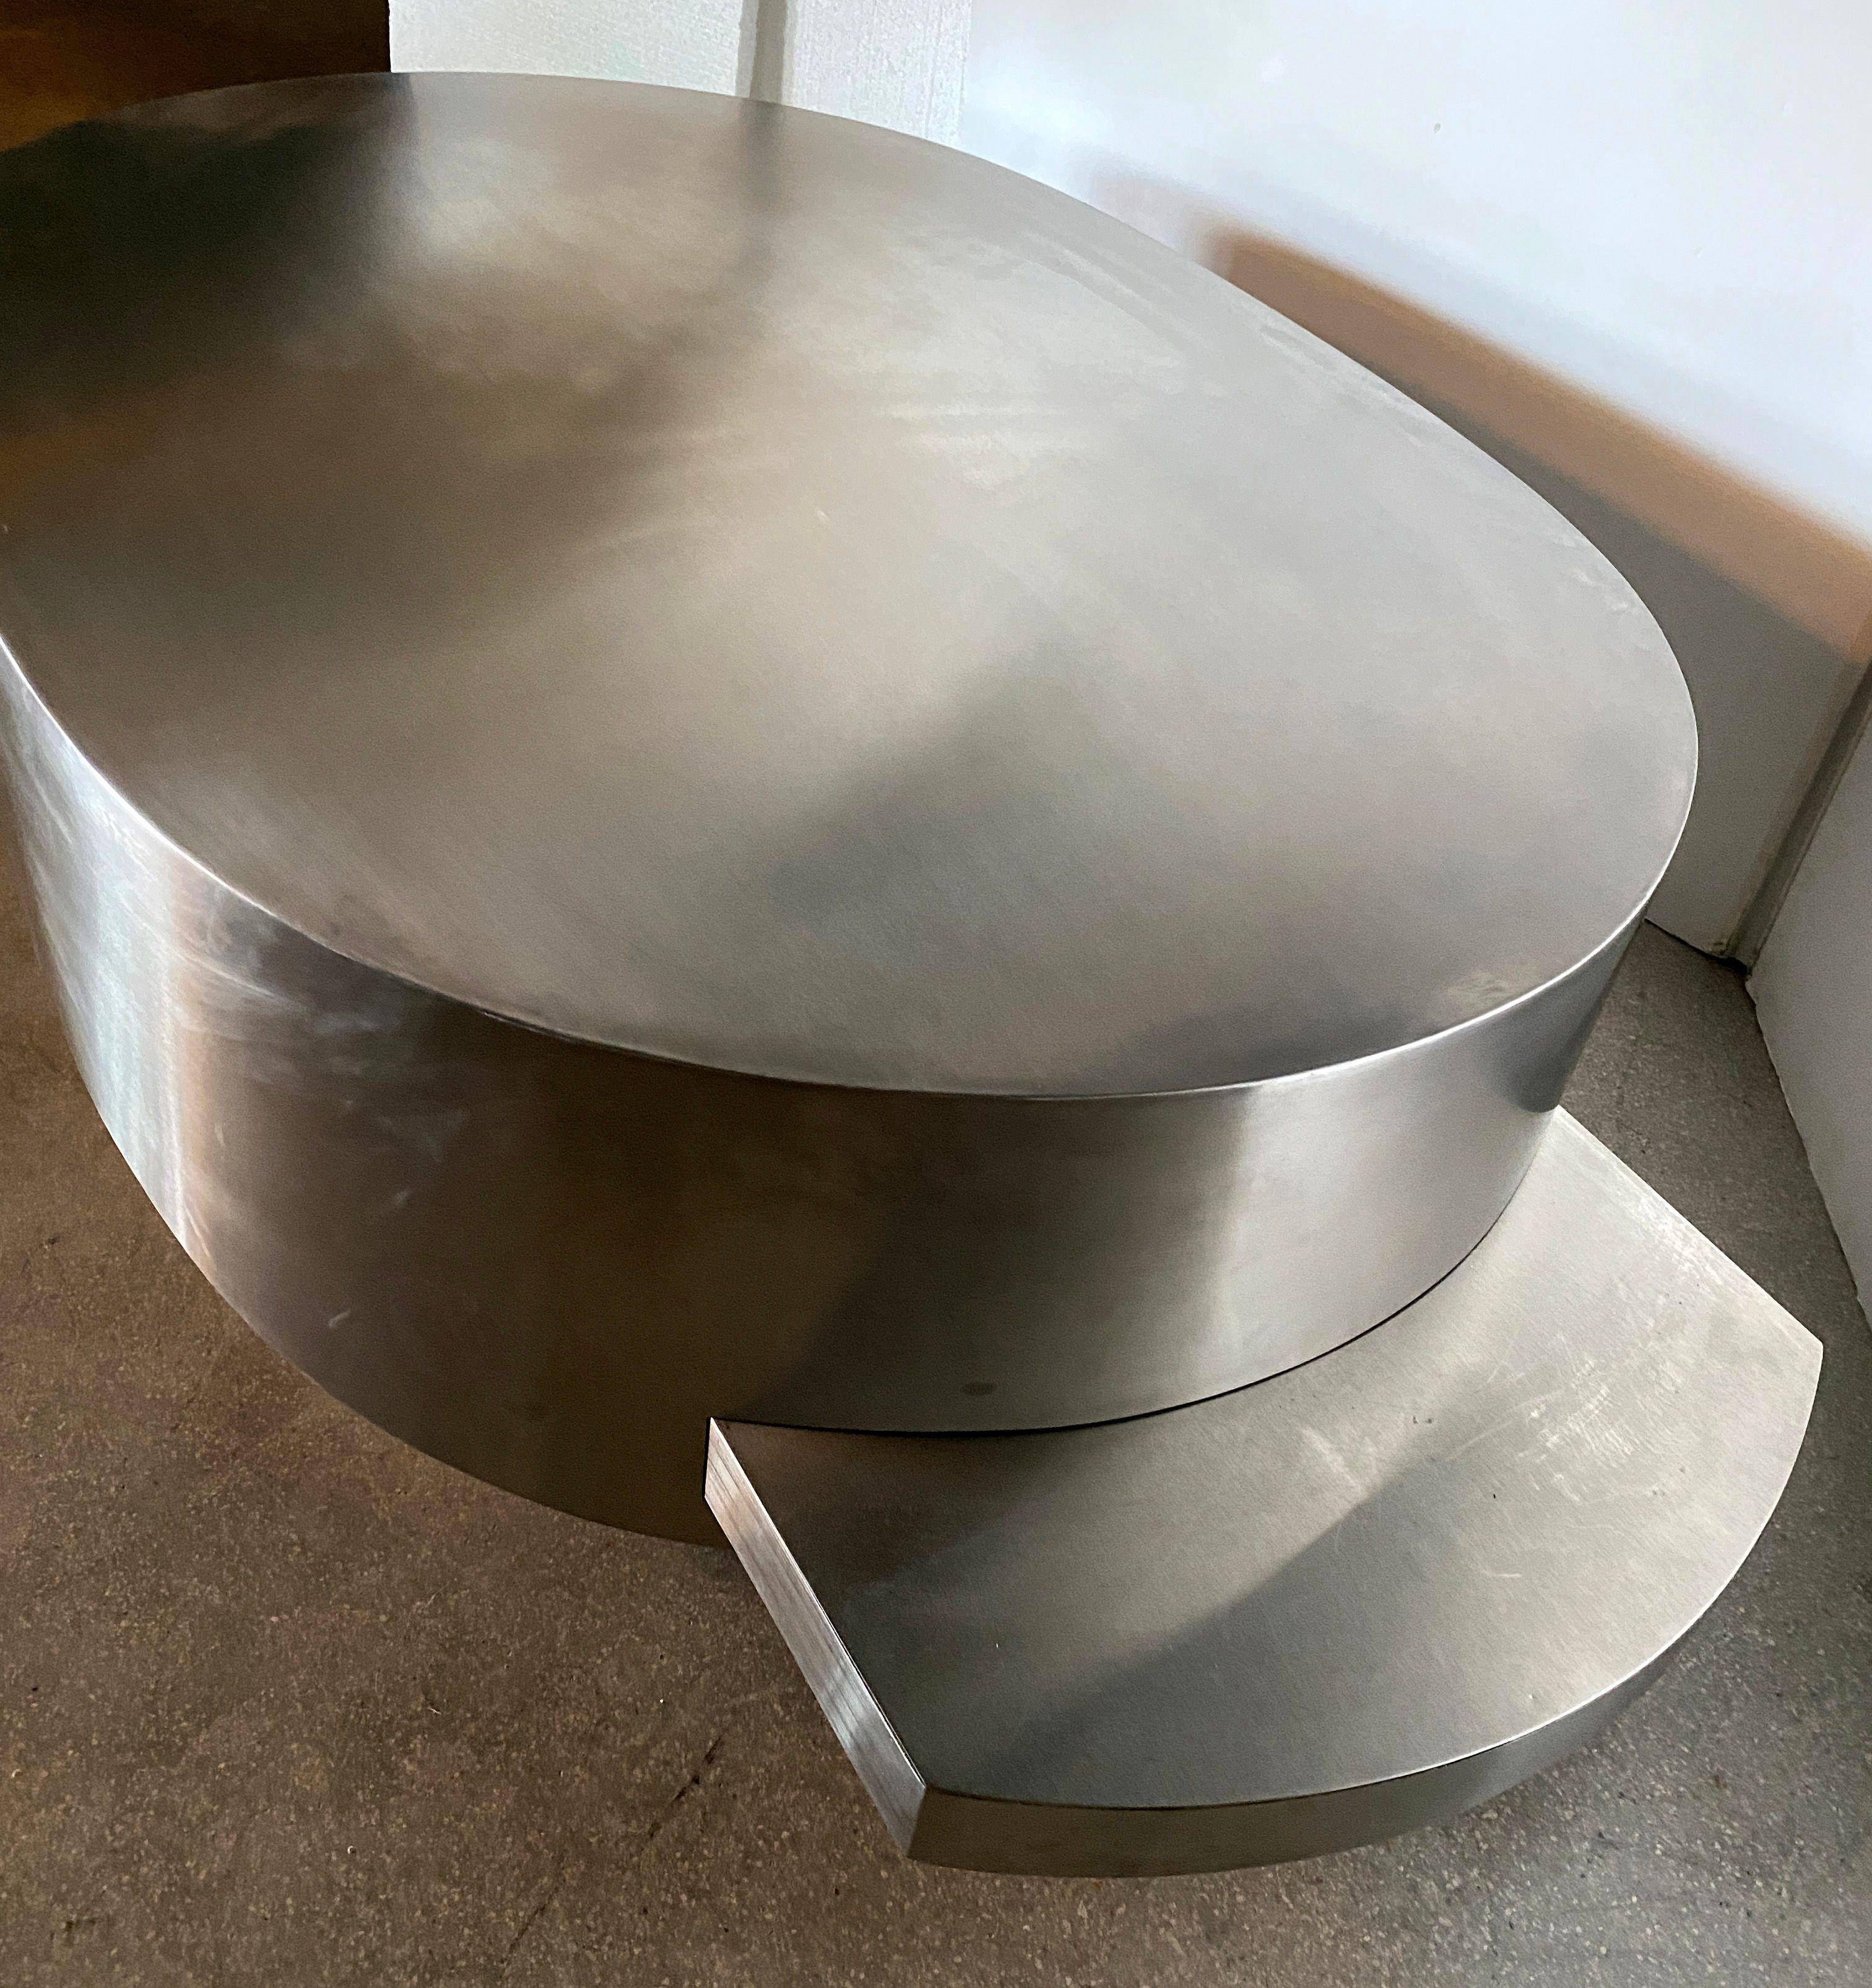 Late 20th Century Italian Modern Stainless Low Table w/ Retractable Slides, Attr. Gabriella Crespi